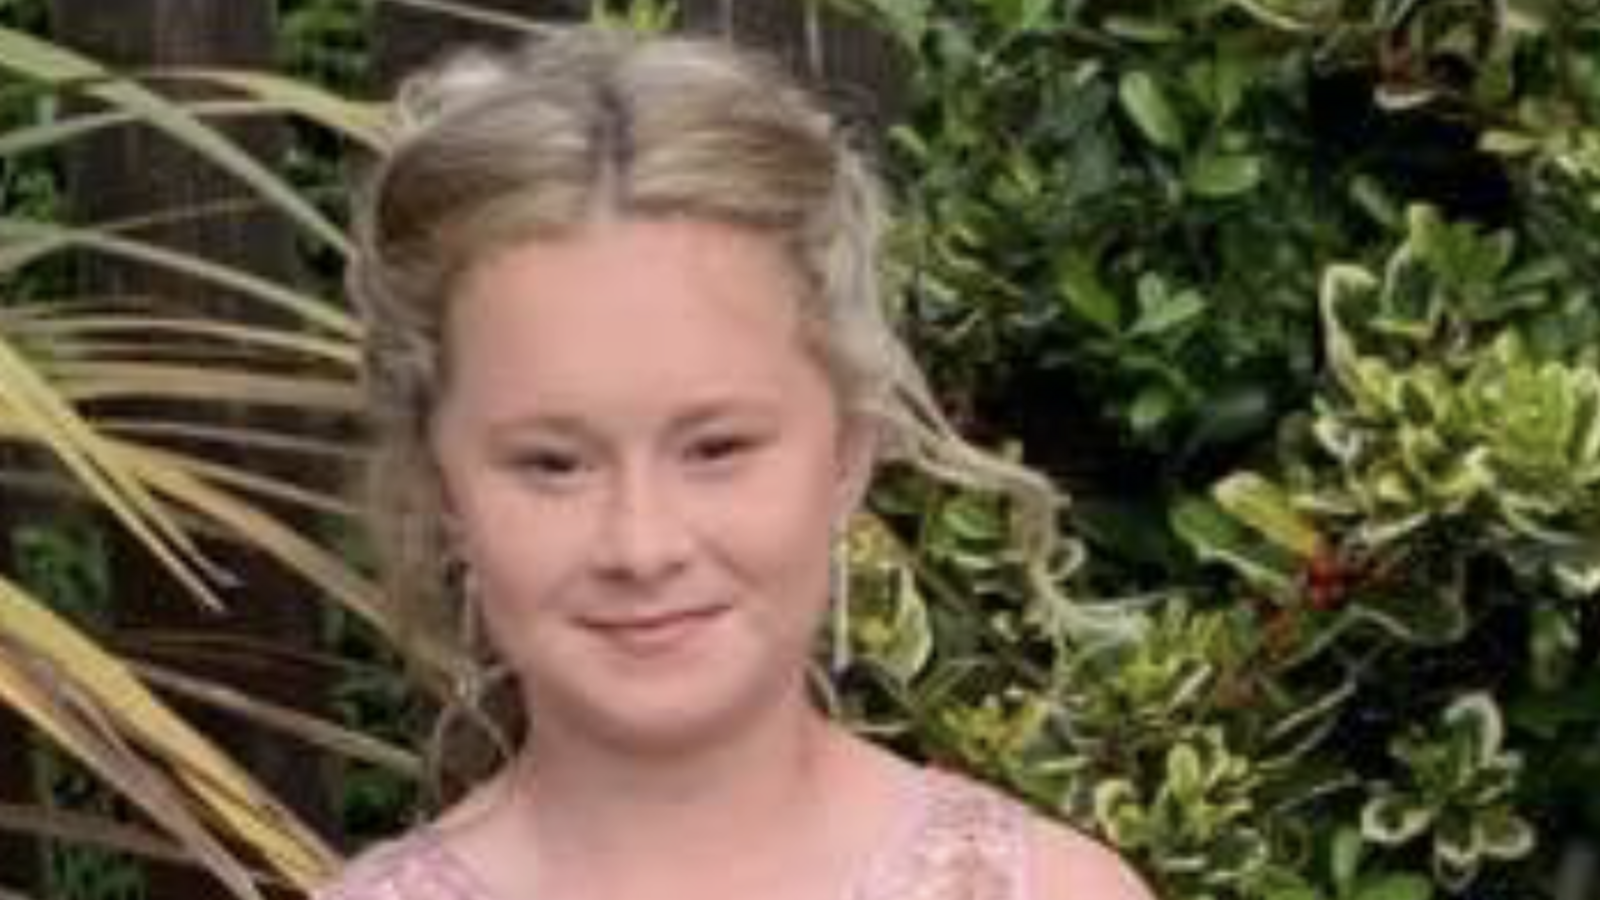 Girl, 14, who died after suspected drug incident is named - as family pay tribute